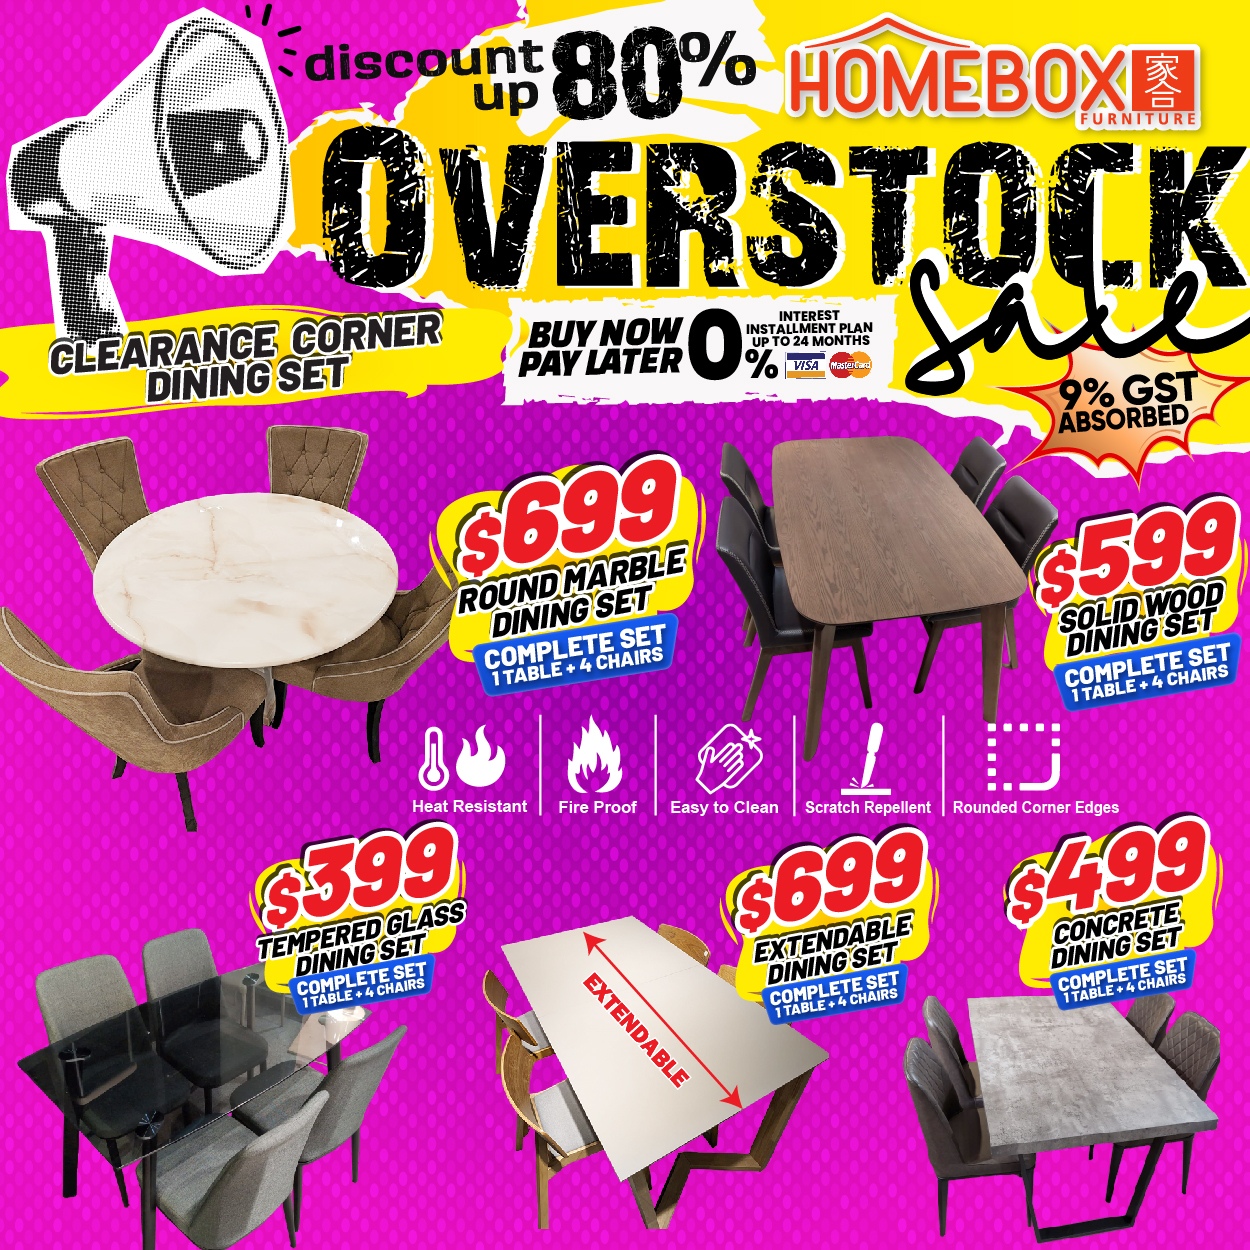 Lobang: Overstock sale at HOMEBOX Furniture @ Aljunied has furniture at up to 80% off from 17 Feb - 3 Mar 24 - 22